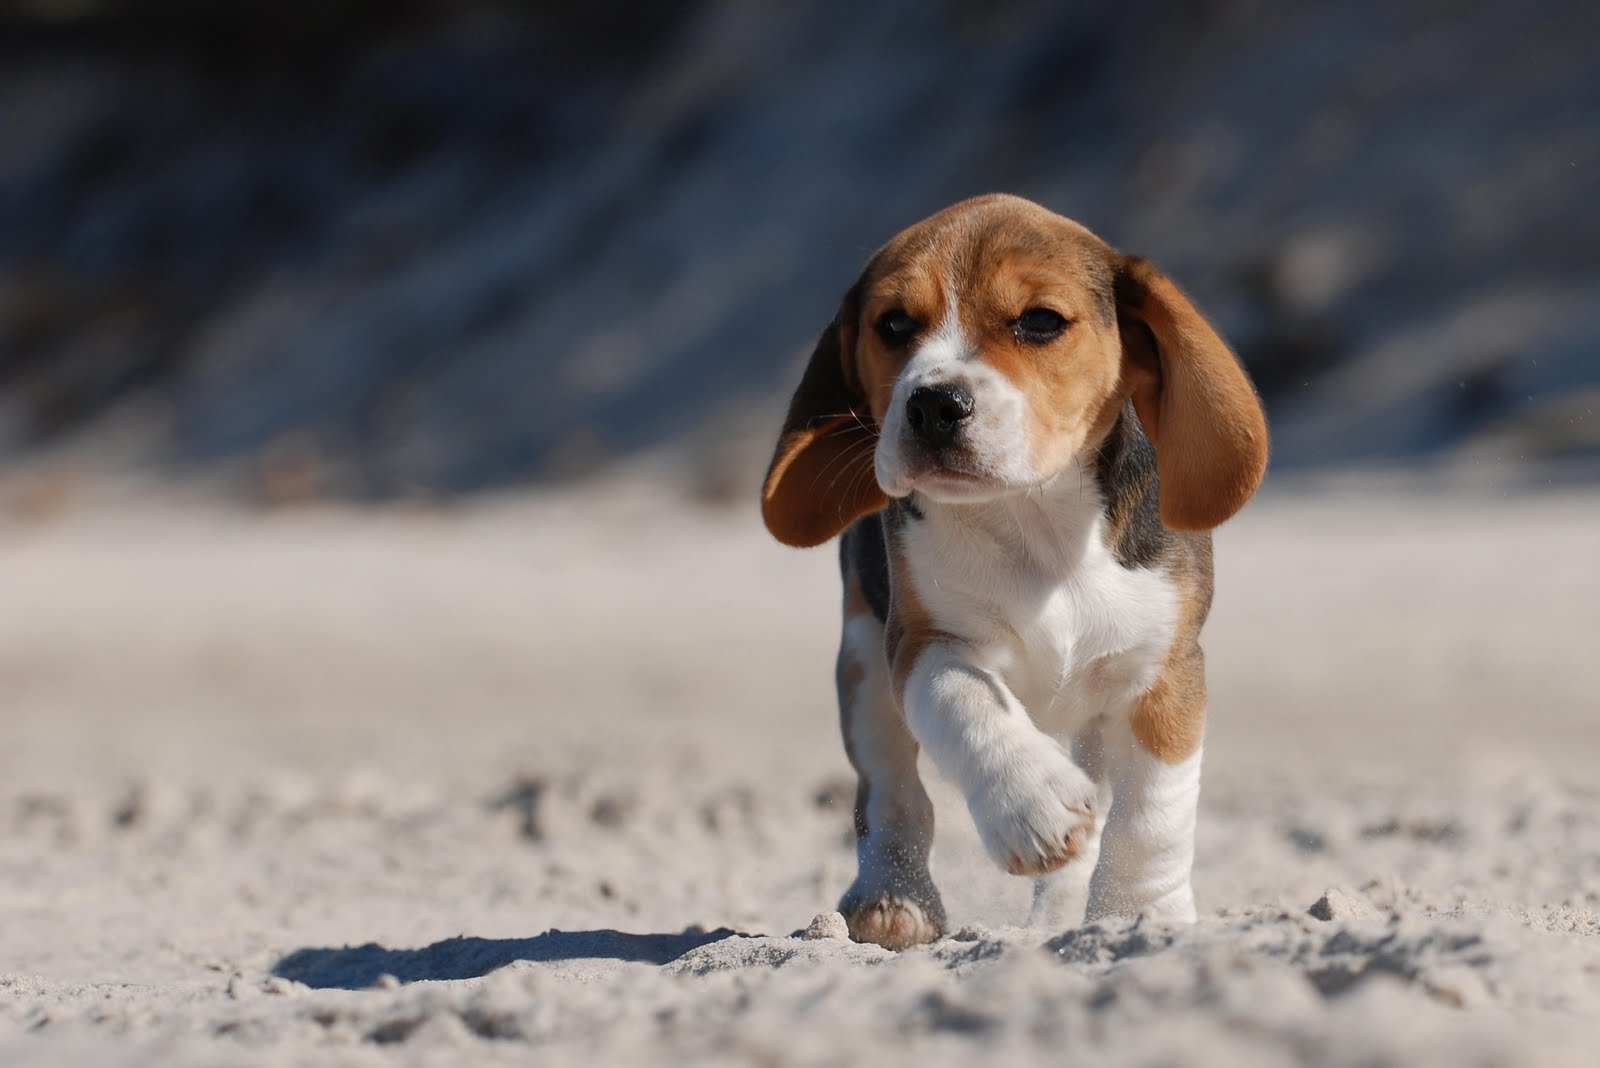 Puppy cute baby animal dog wallpaper free download photos for